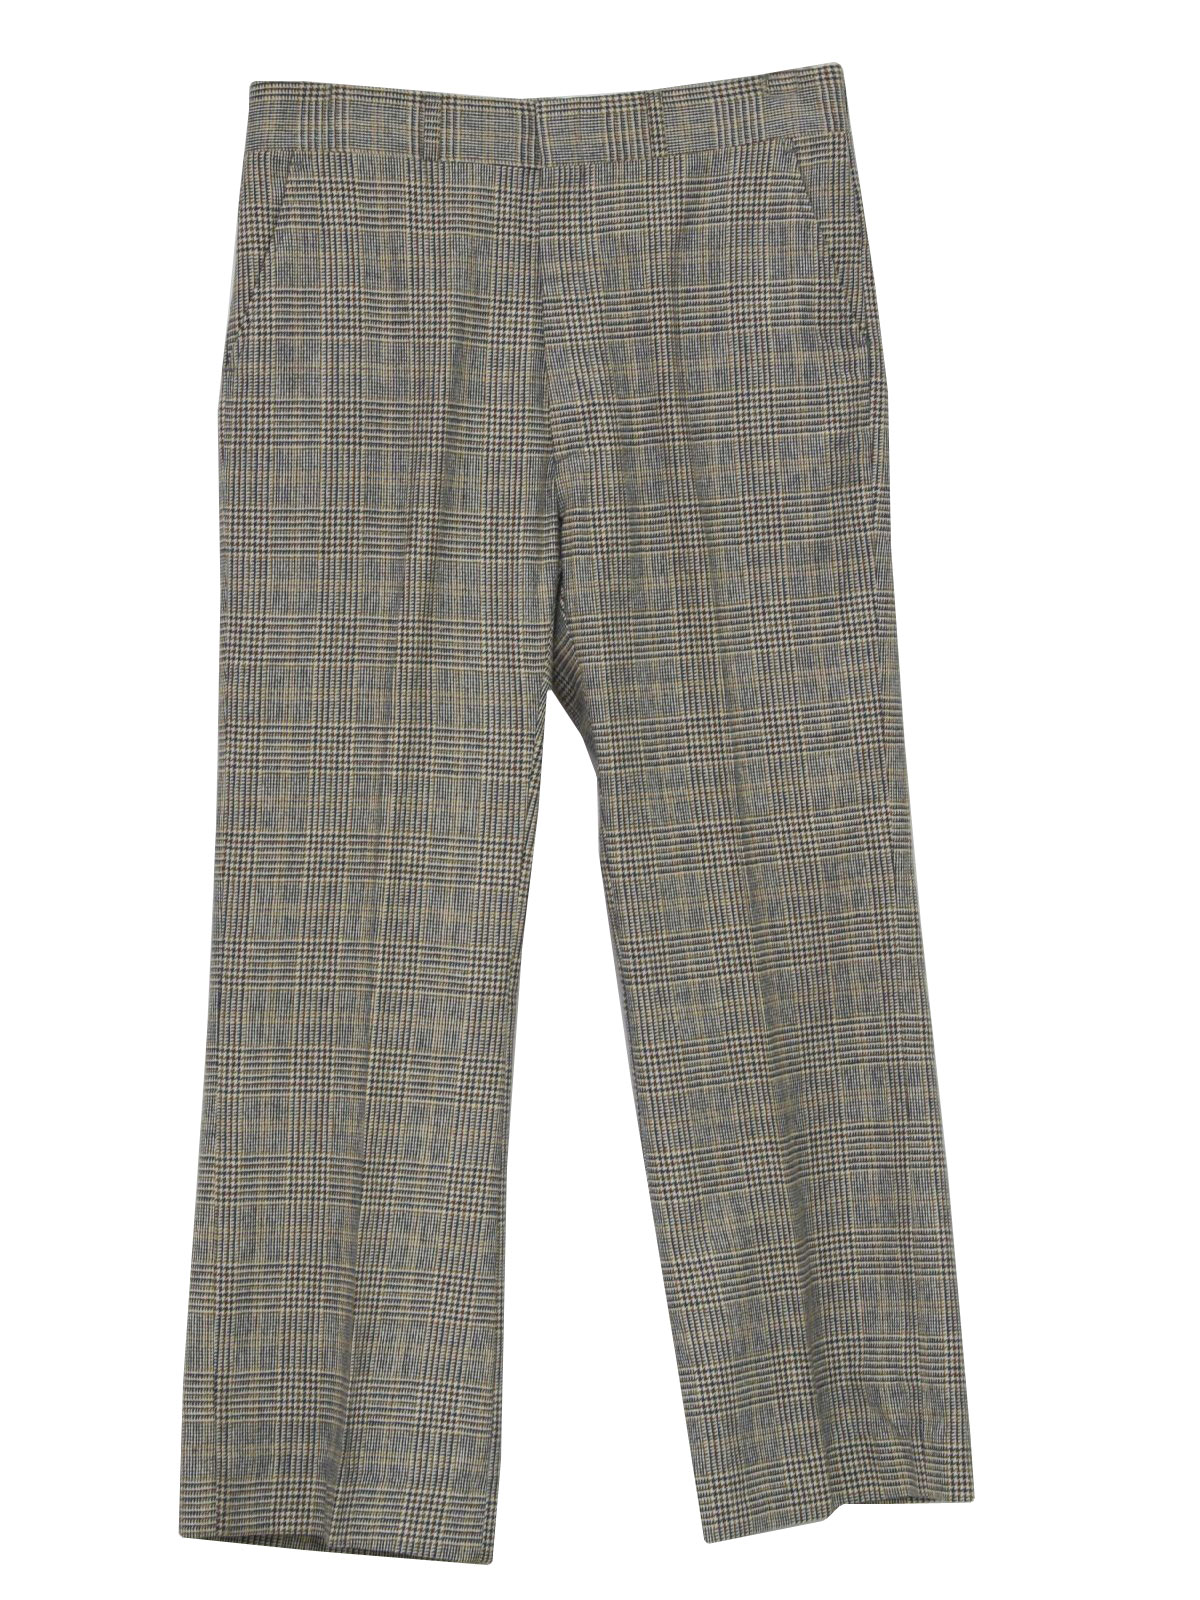 1970's Flared Pants / Flares (Haggar Imperial): 70s -Haggar Imperial ...